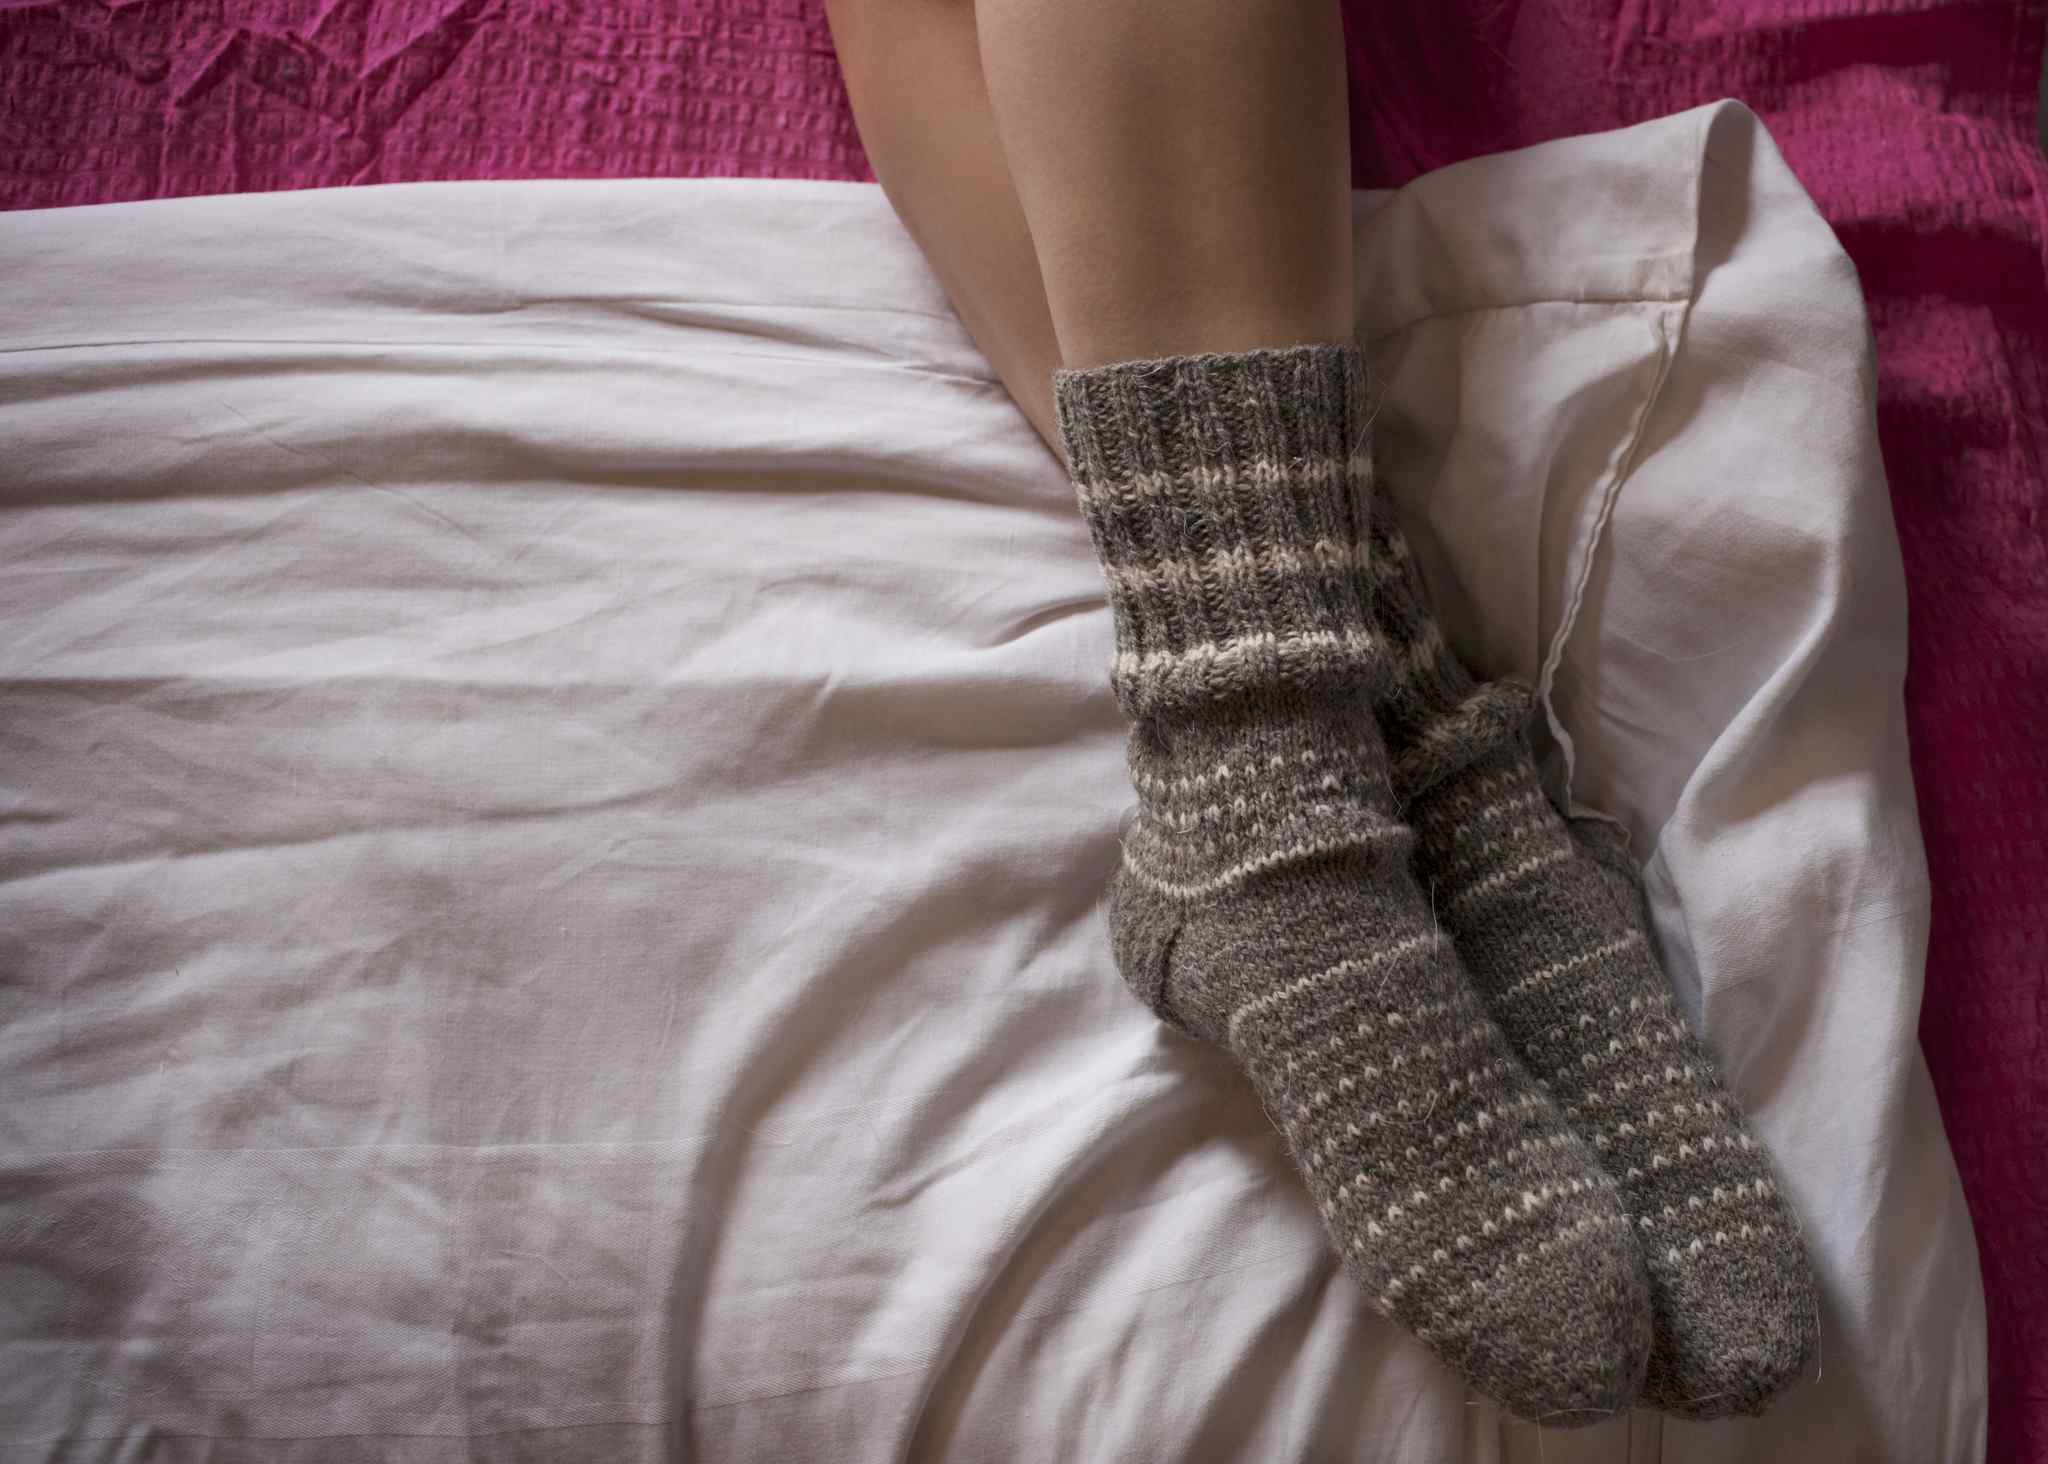 Woman wearing warm gray socks while lying on a bed.